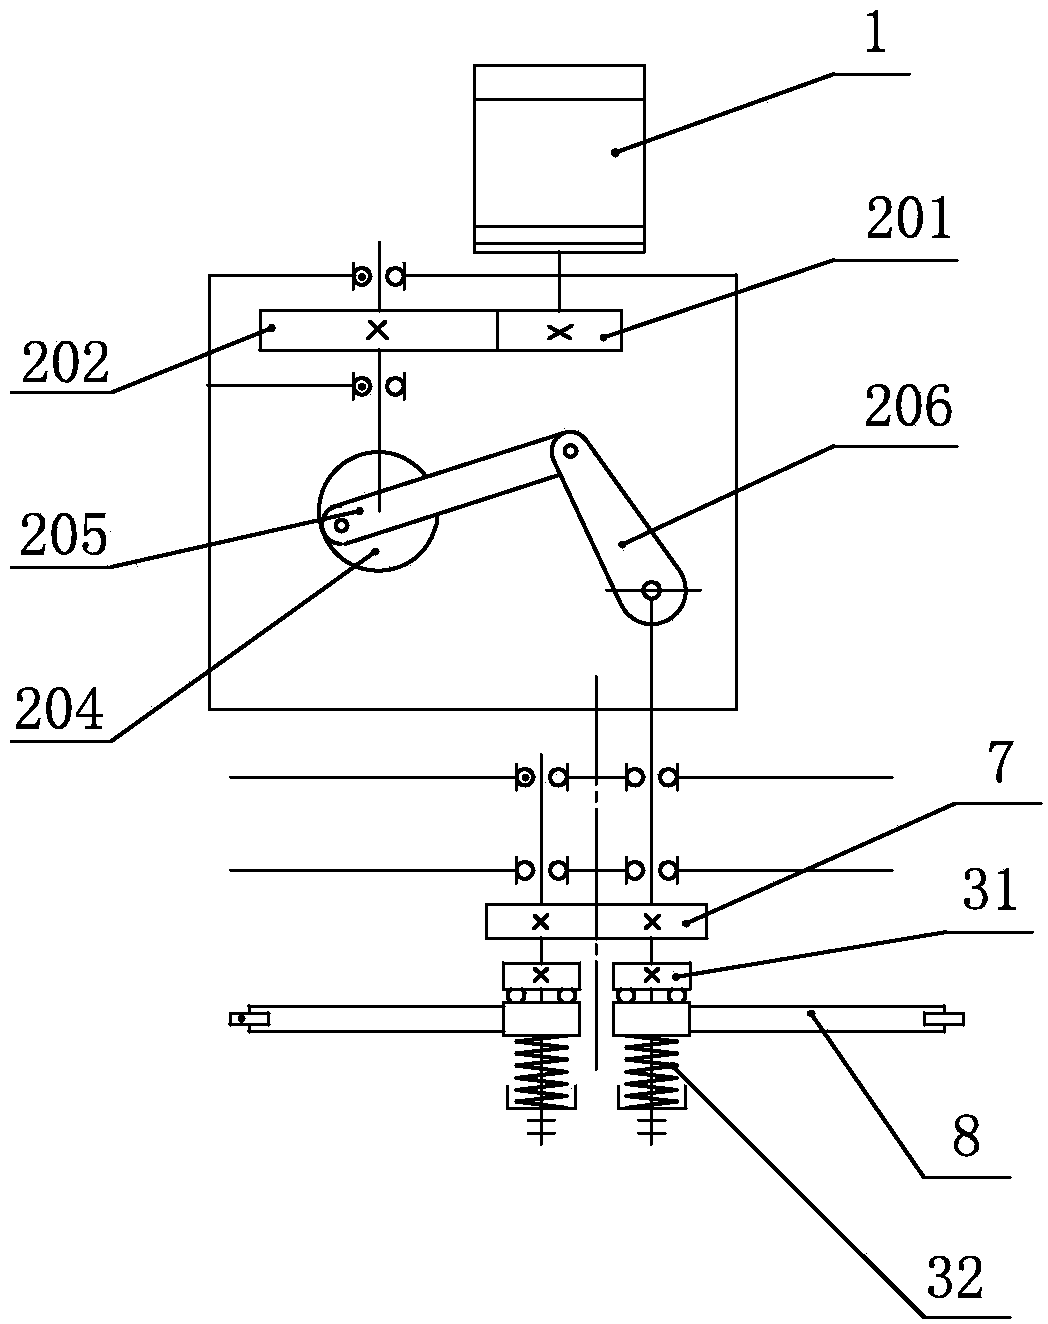 Mold bar push-out mechanism in capsule production system